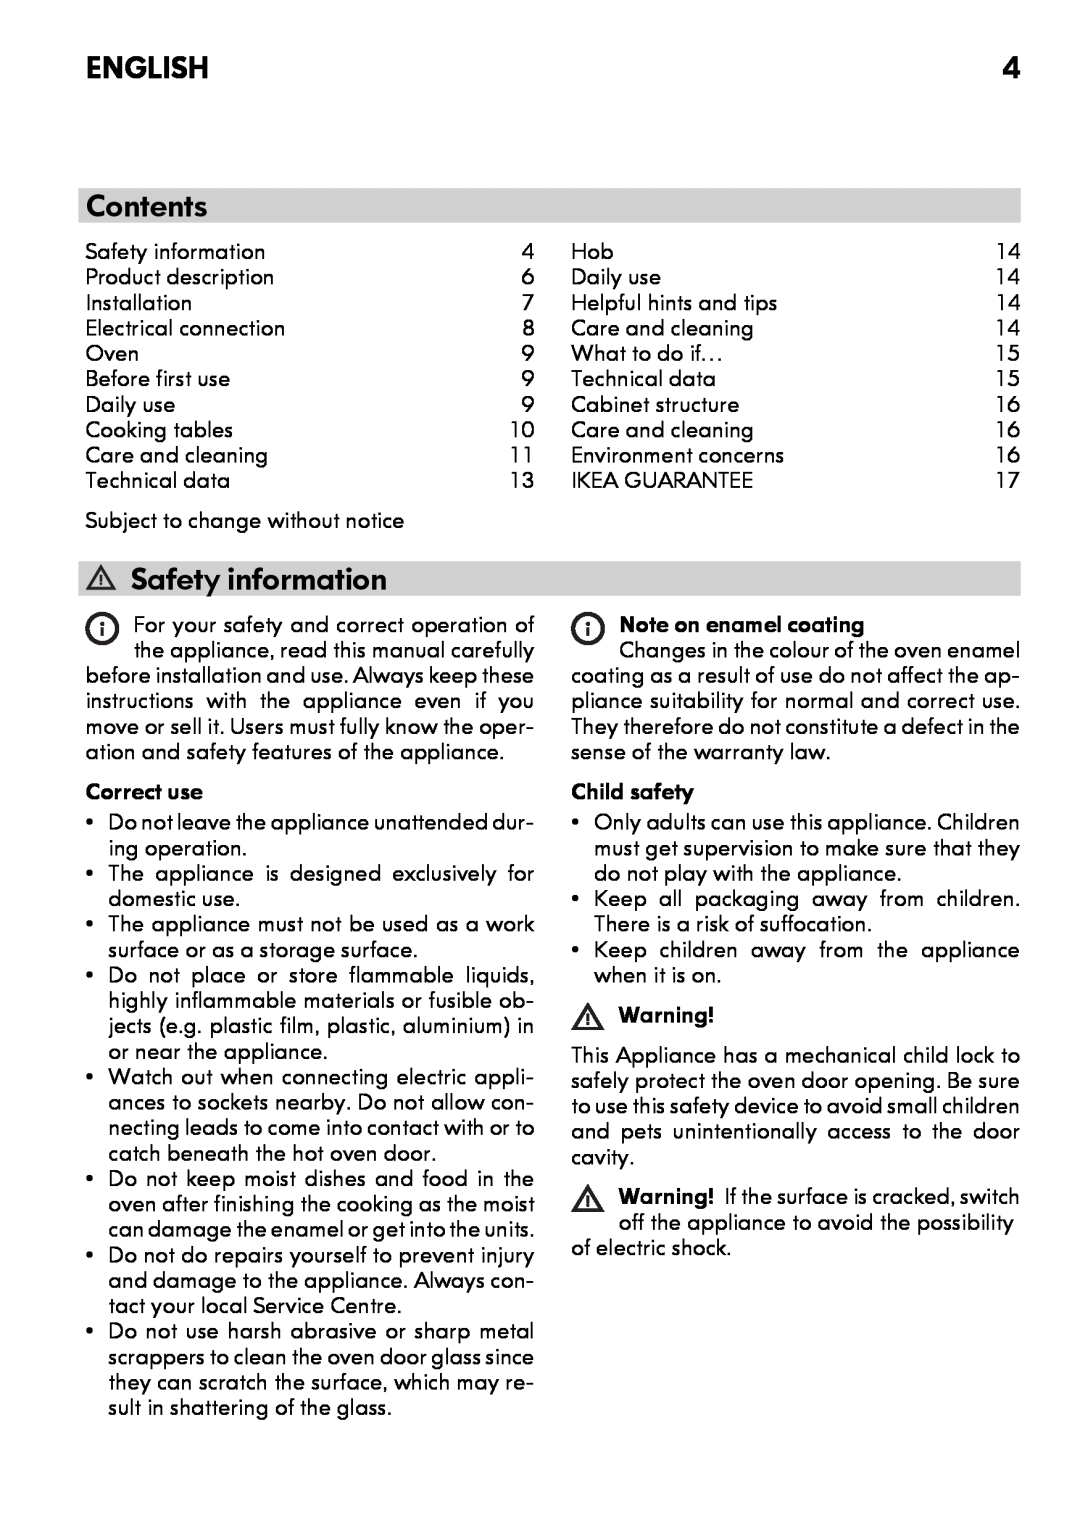 IKEA CG3 manual English, Contents, Safety information 